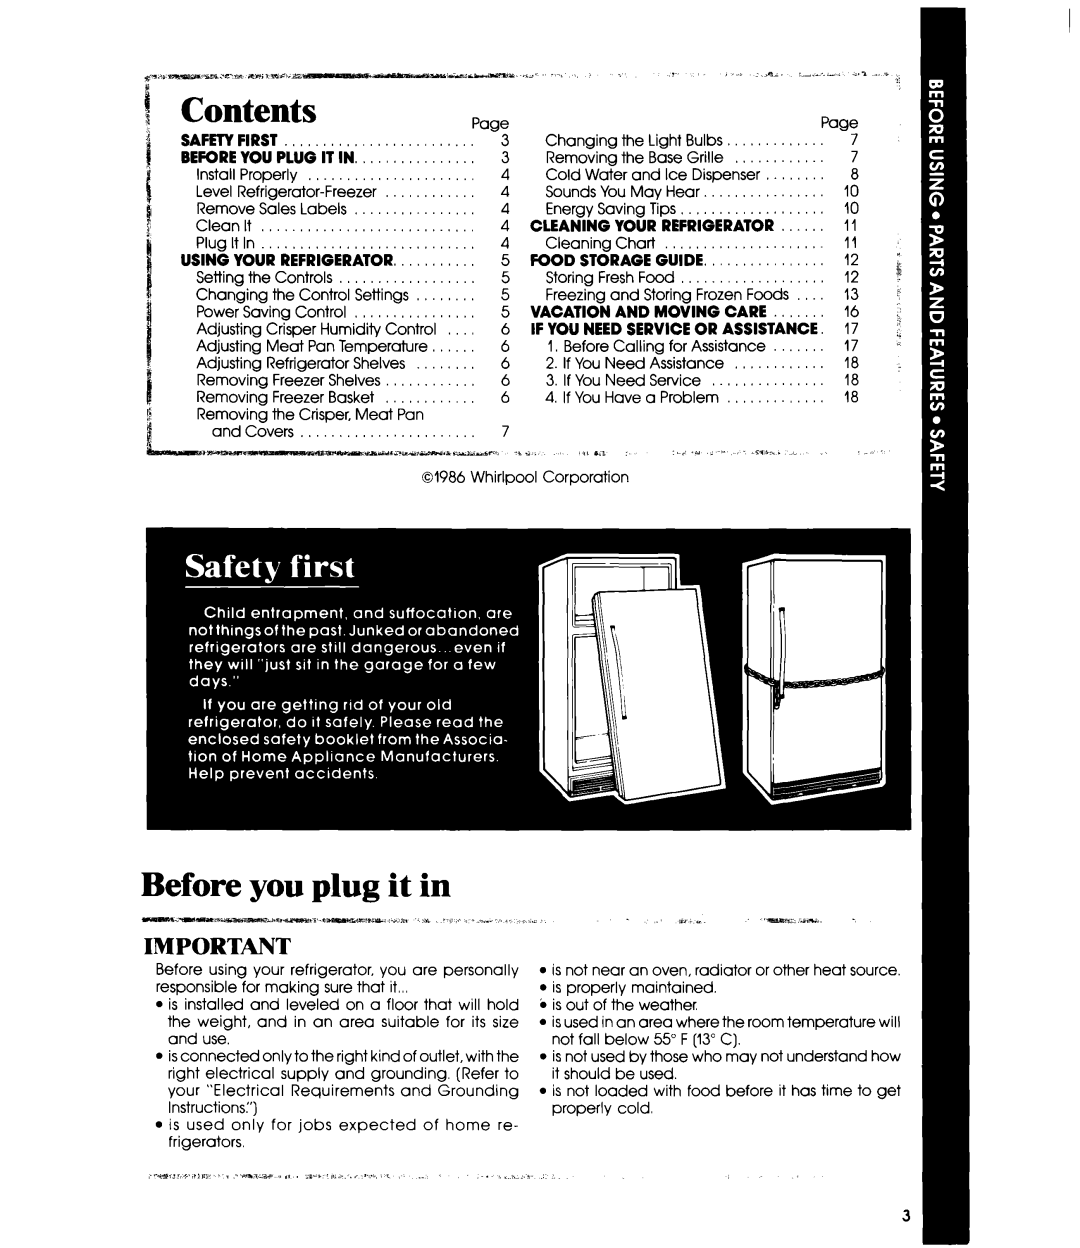 Whirlpool ED25SMIII manual Before you plug it in, Contents 